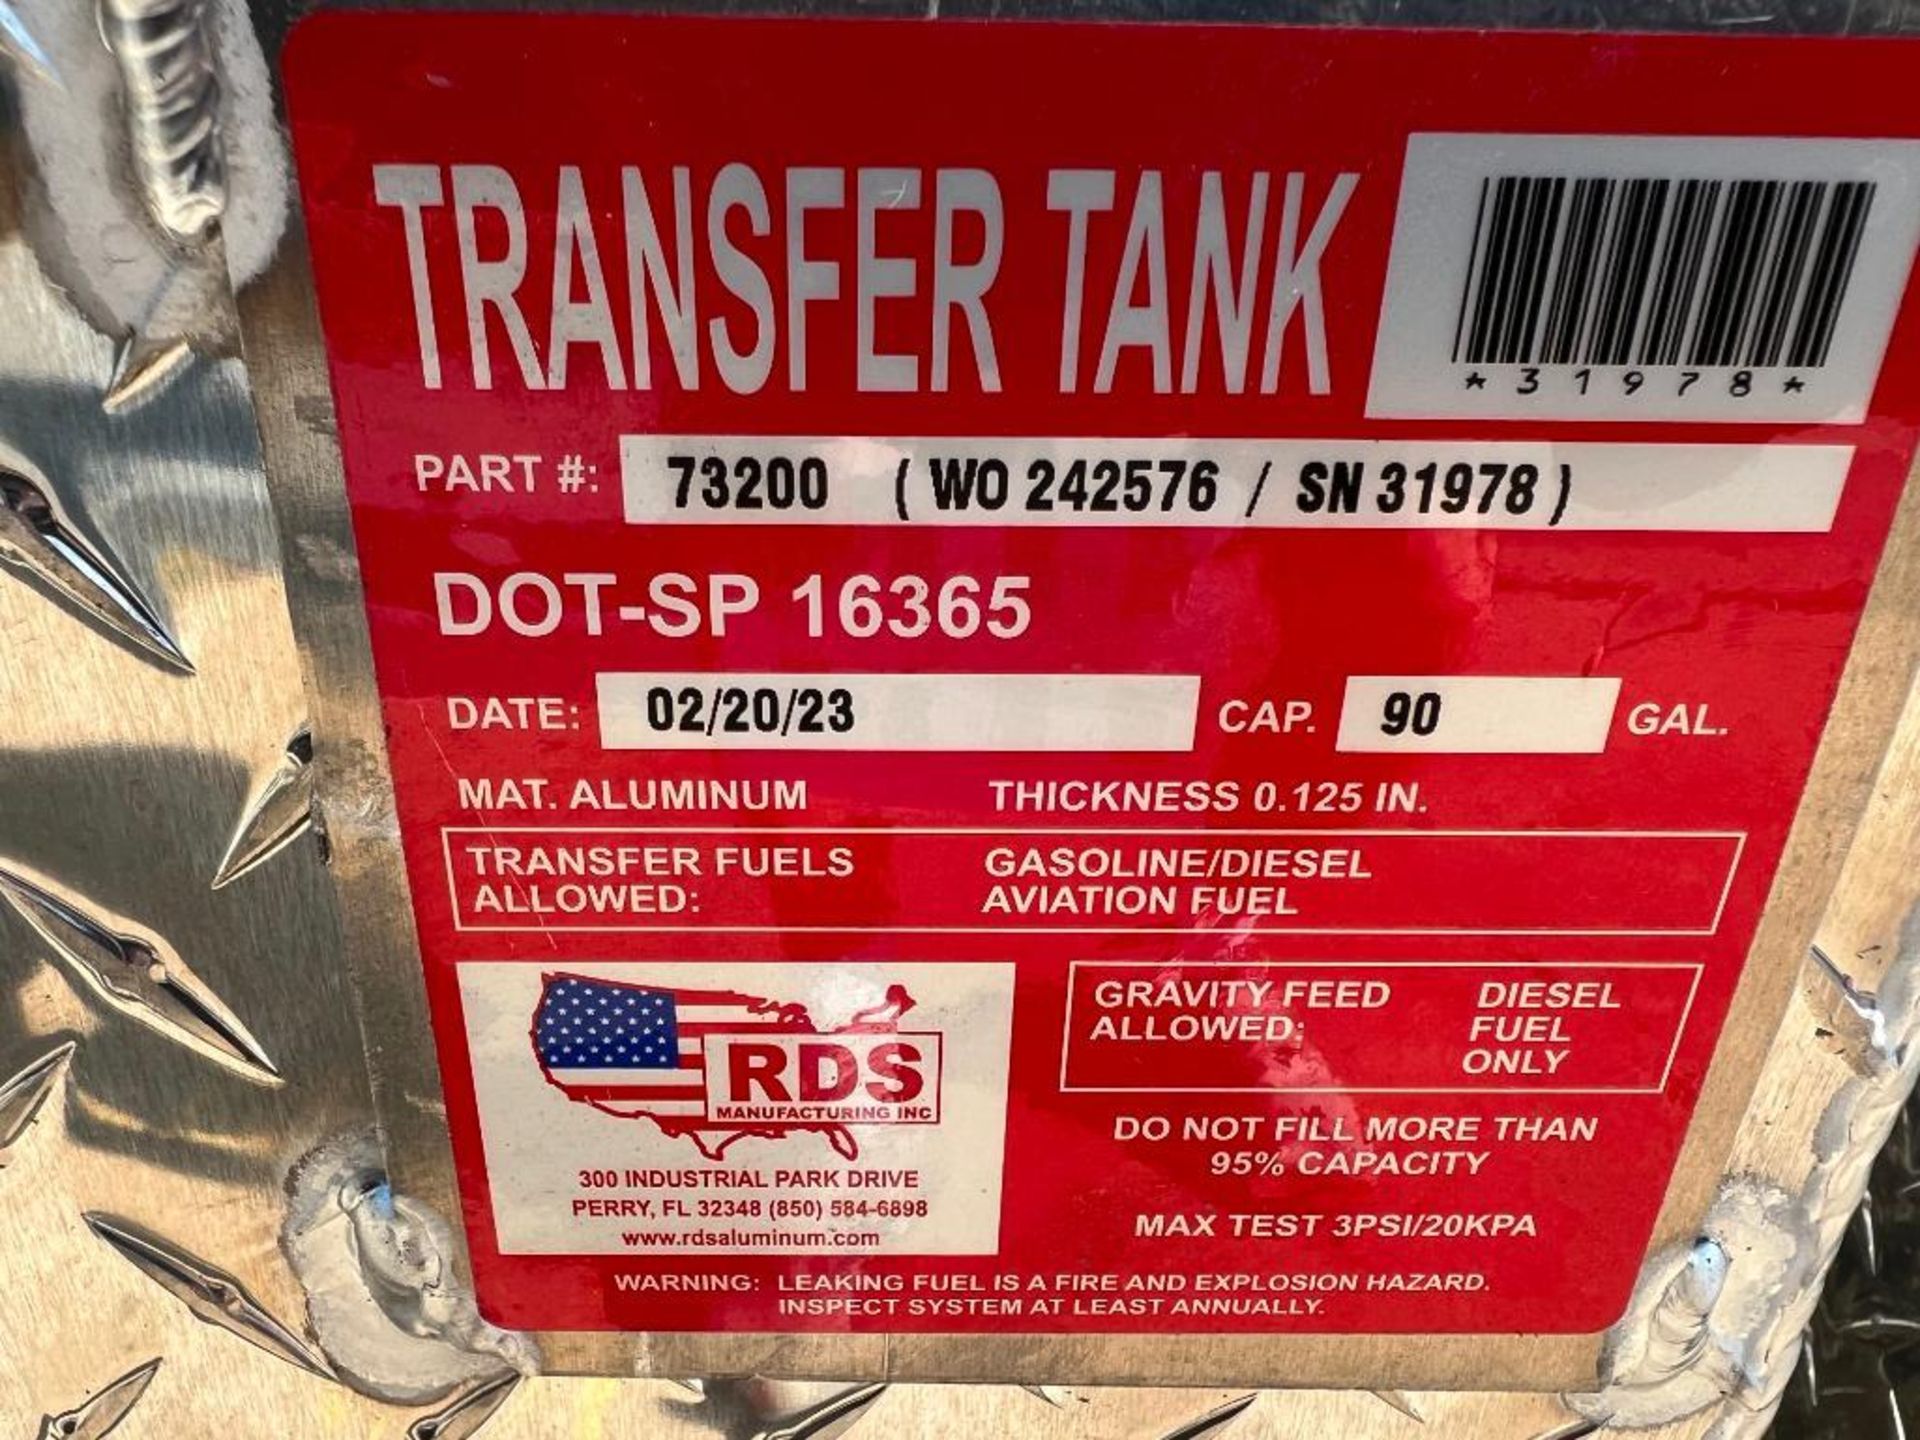 NEW RDS 90 Gallon Diesel Fuel Transfer Tank, Serial #31978. Located in Mt. Pleasant, IA - Image 3 of 5